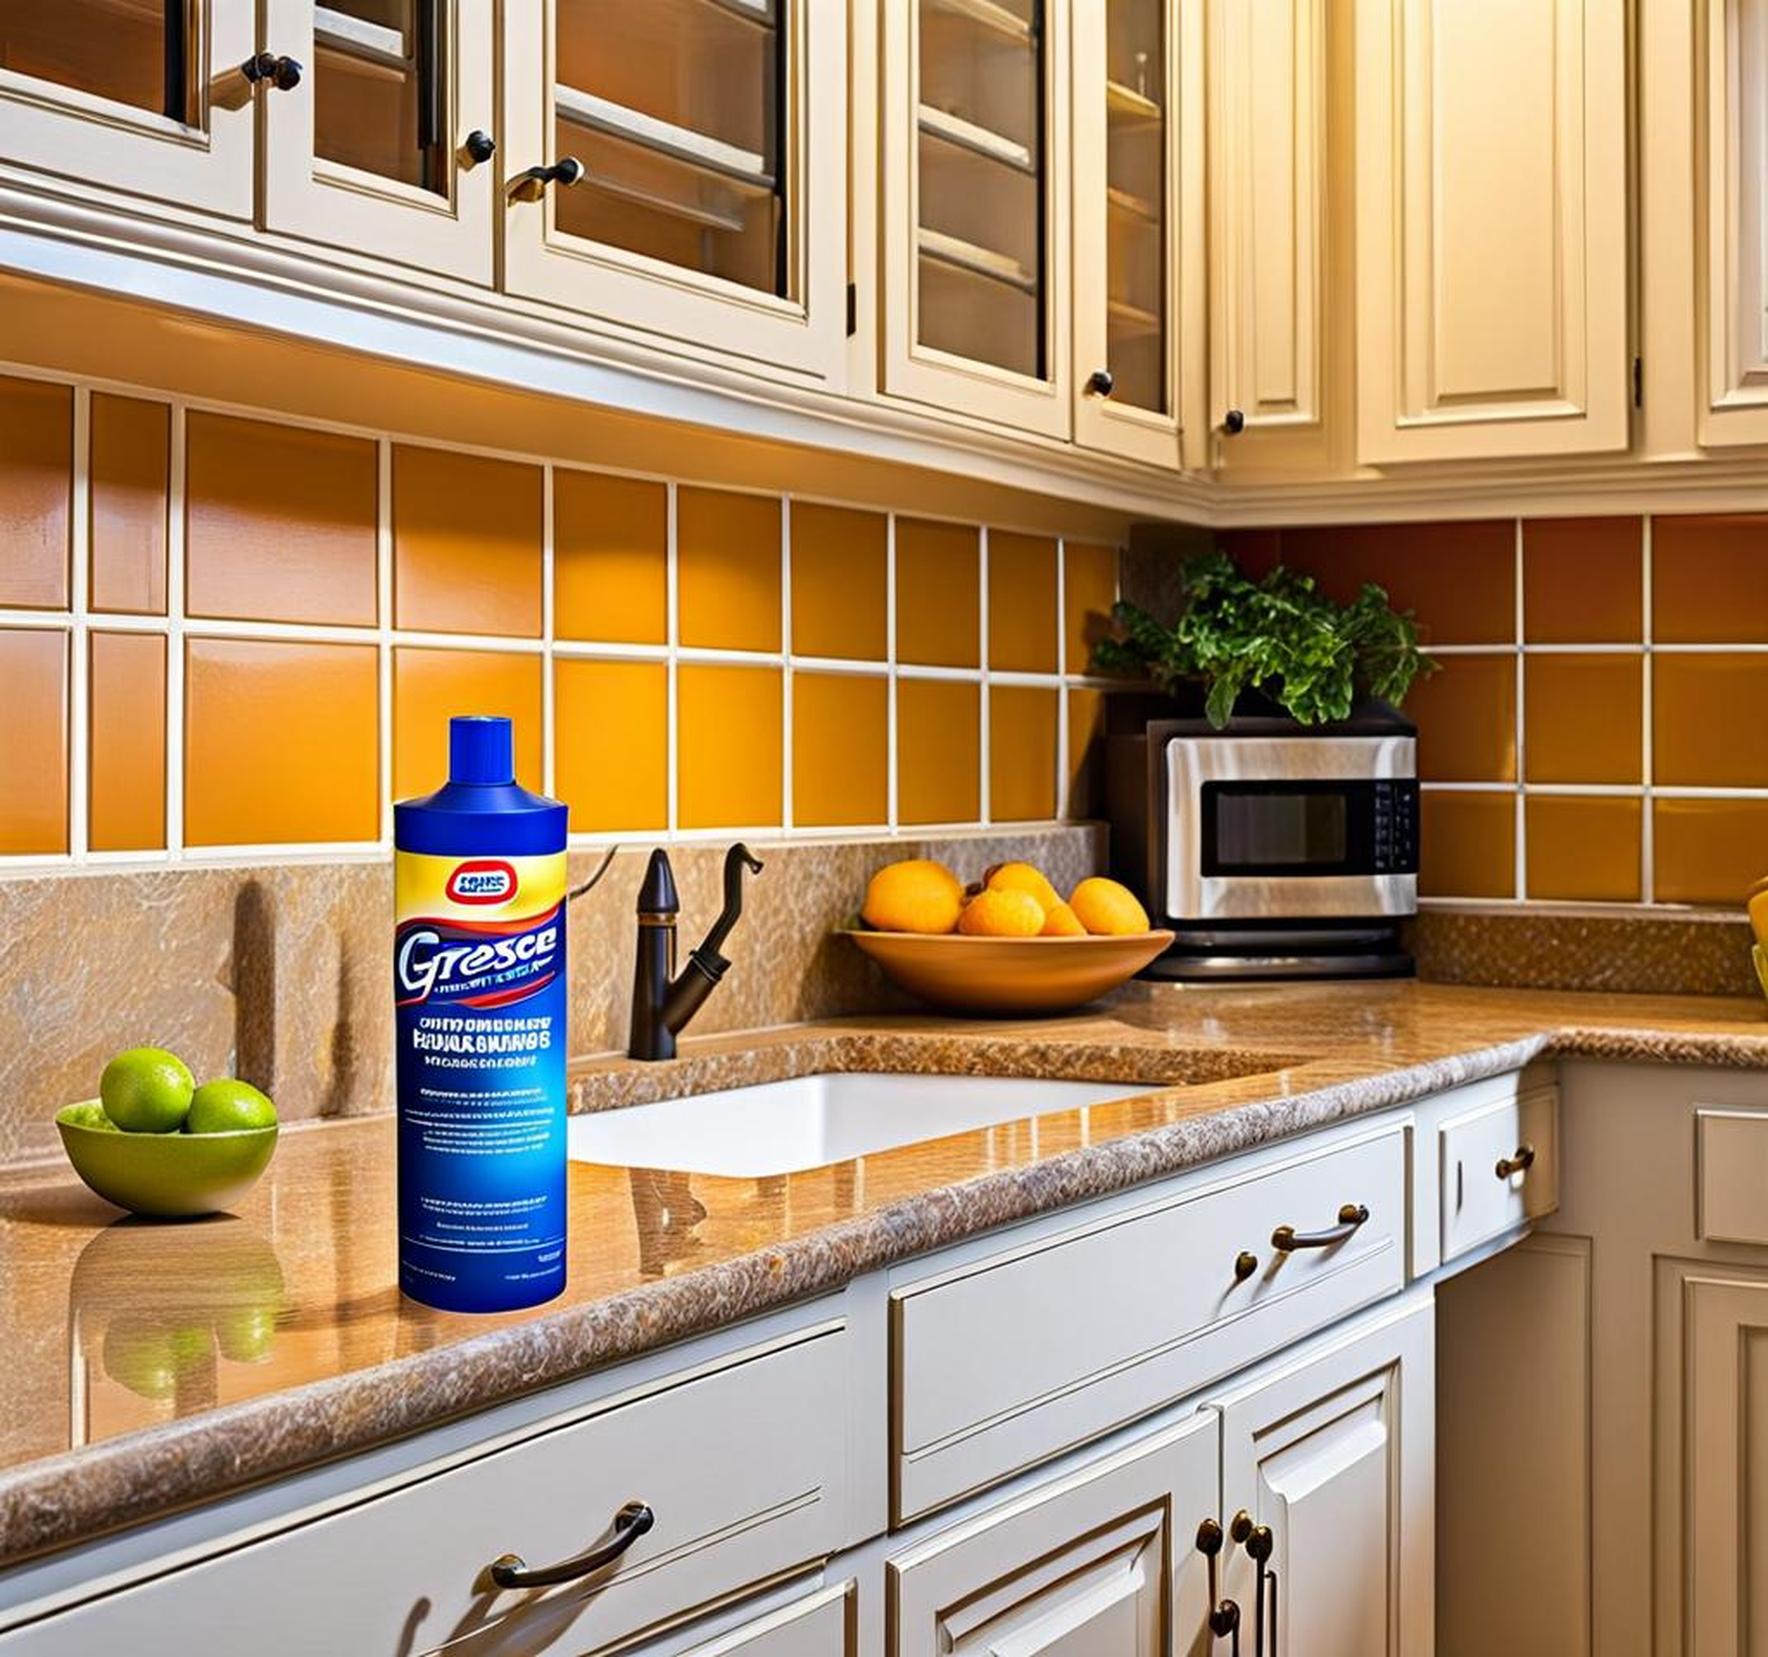 best degreaser for kitchen cabinets before painting